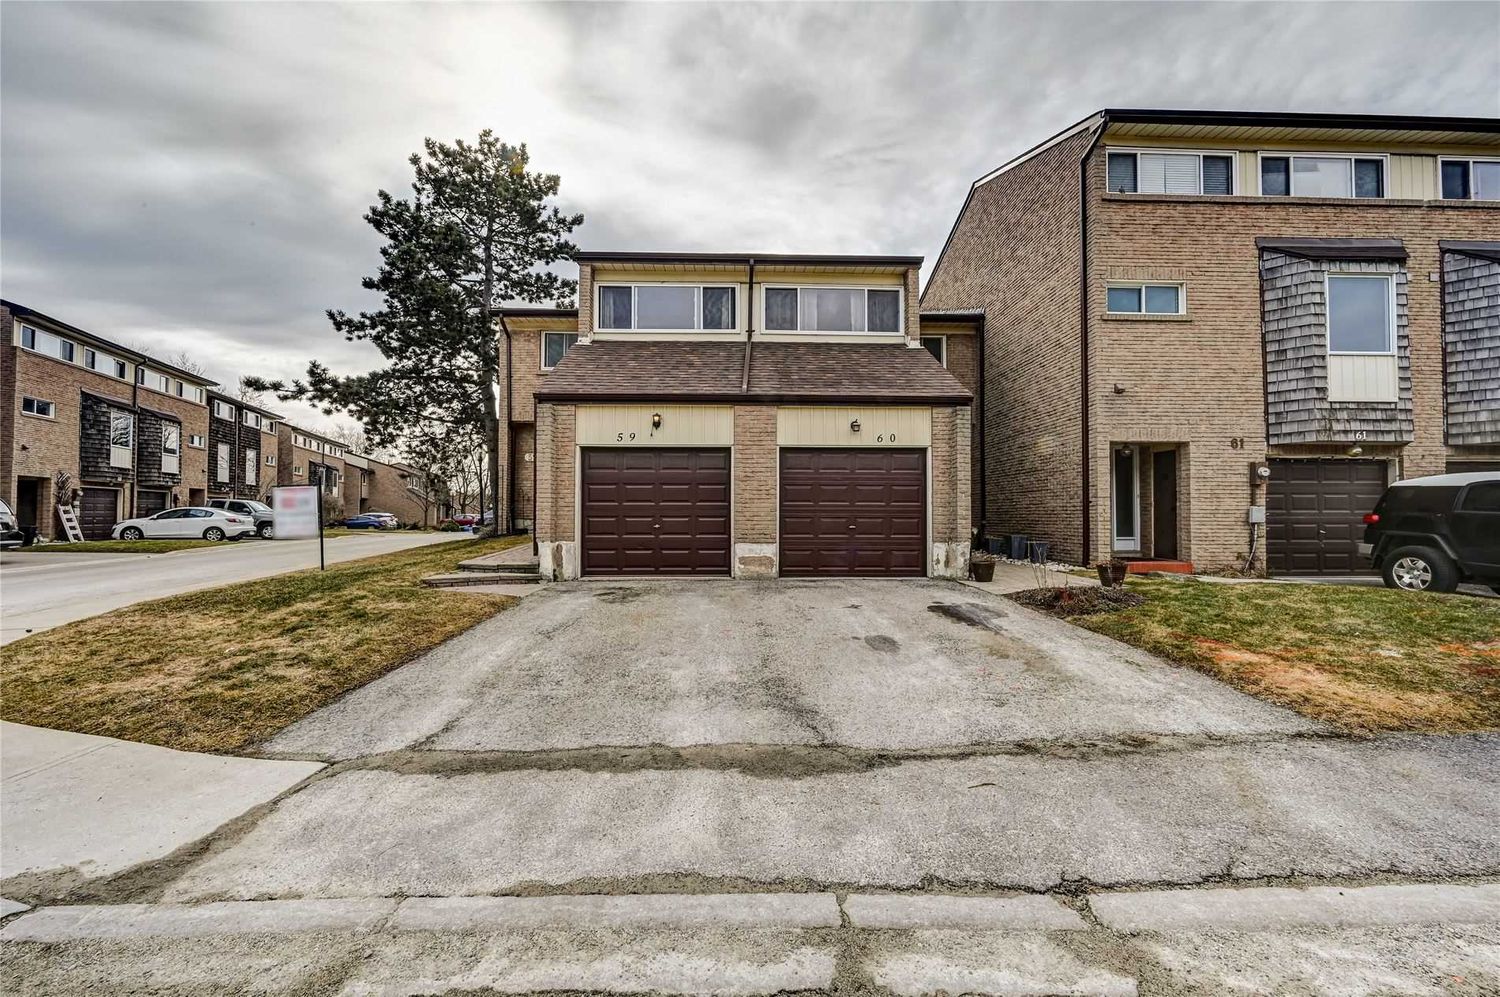 661 Childs Drive. 661 Childs Drive Townhomes is located in  Milton, Toronto - image #1 of 2